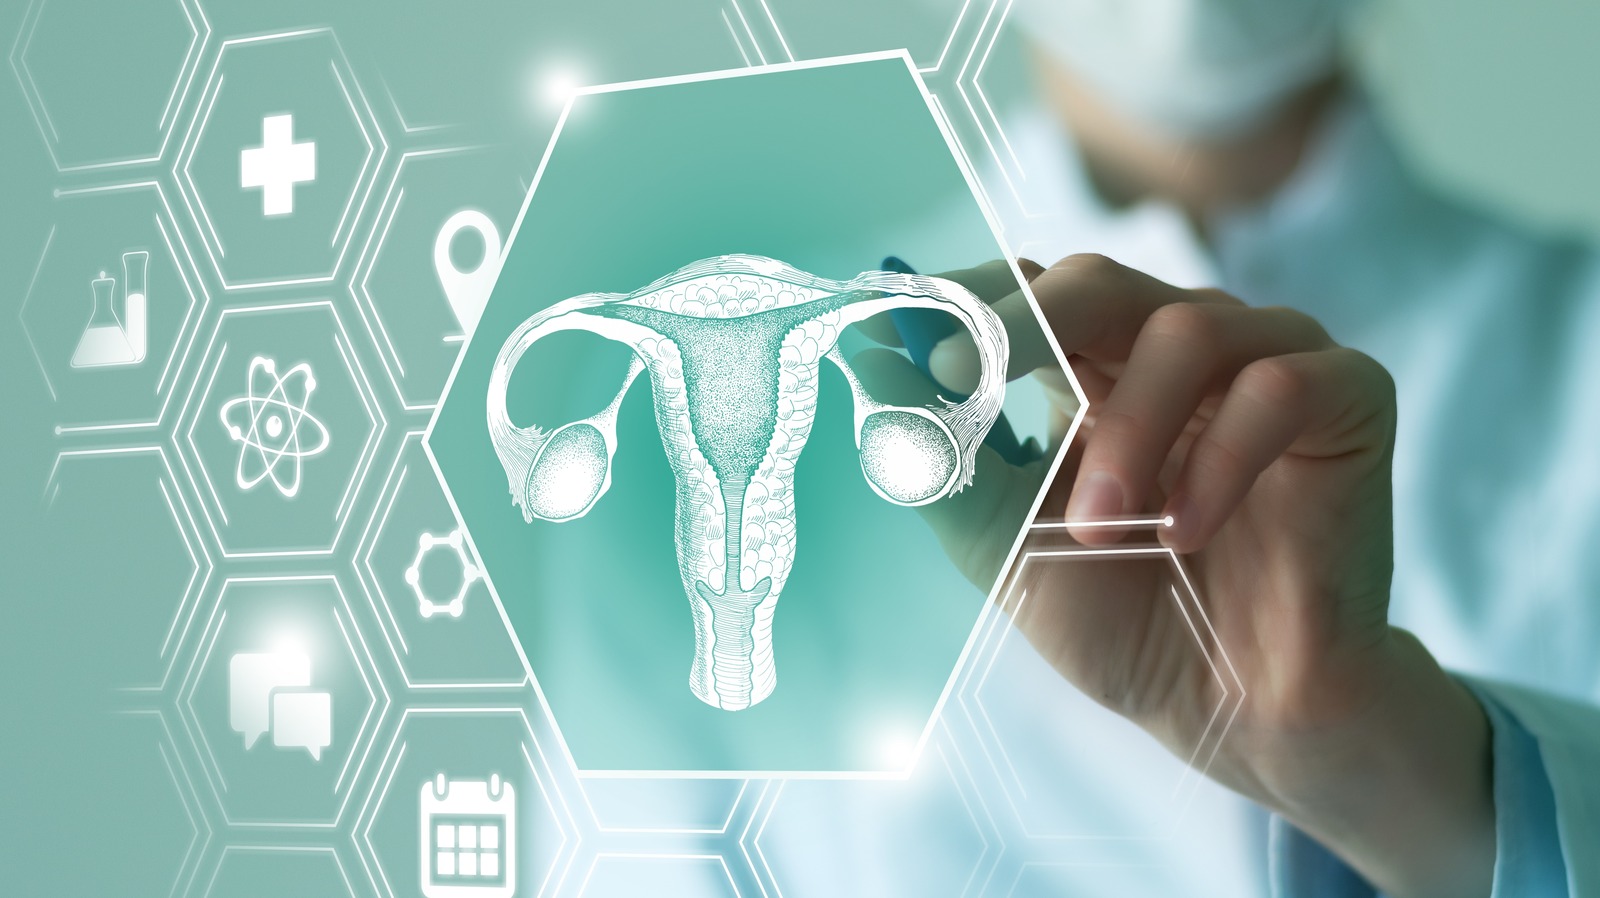 This is when cervical cancer could be considered a thing of the past, according to researchers